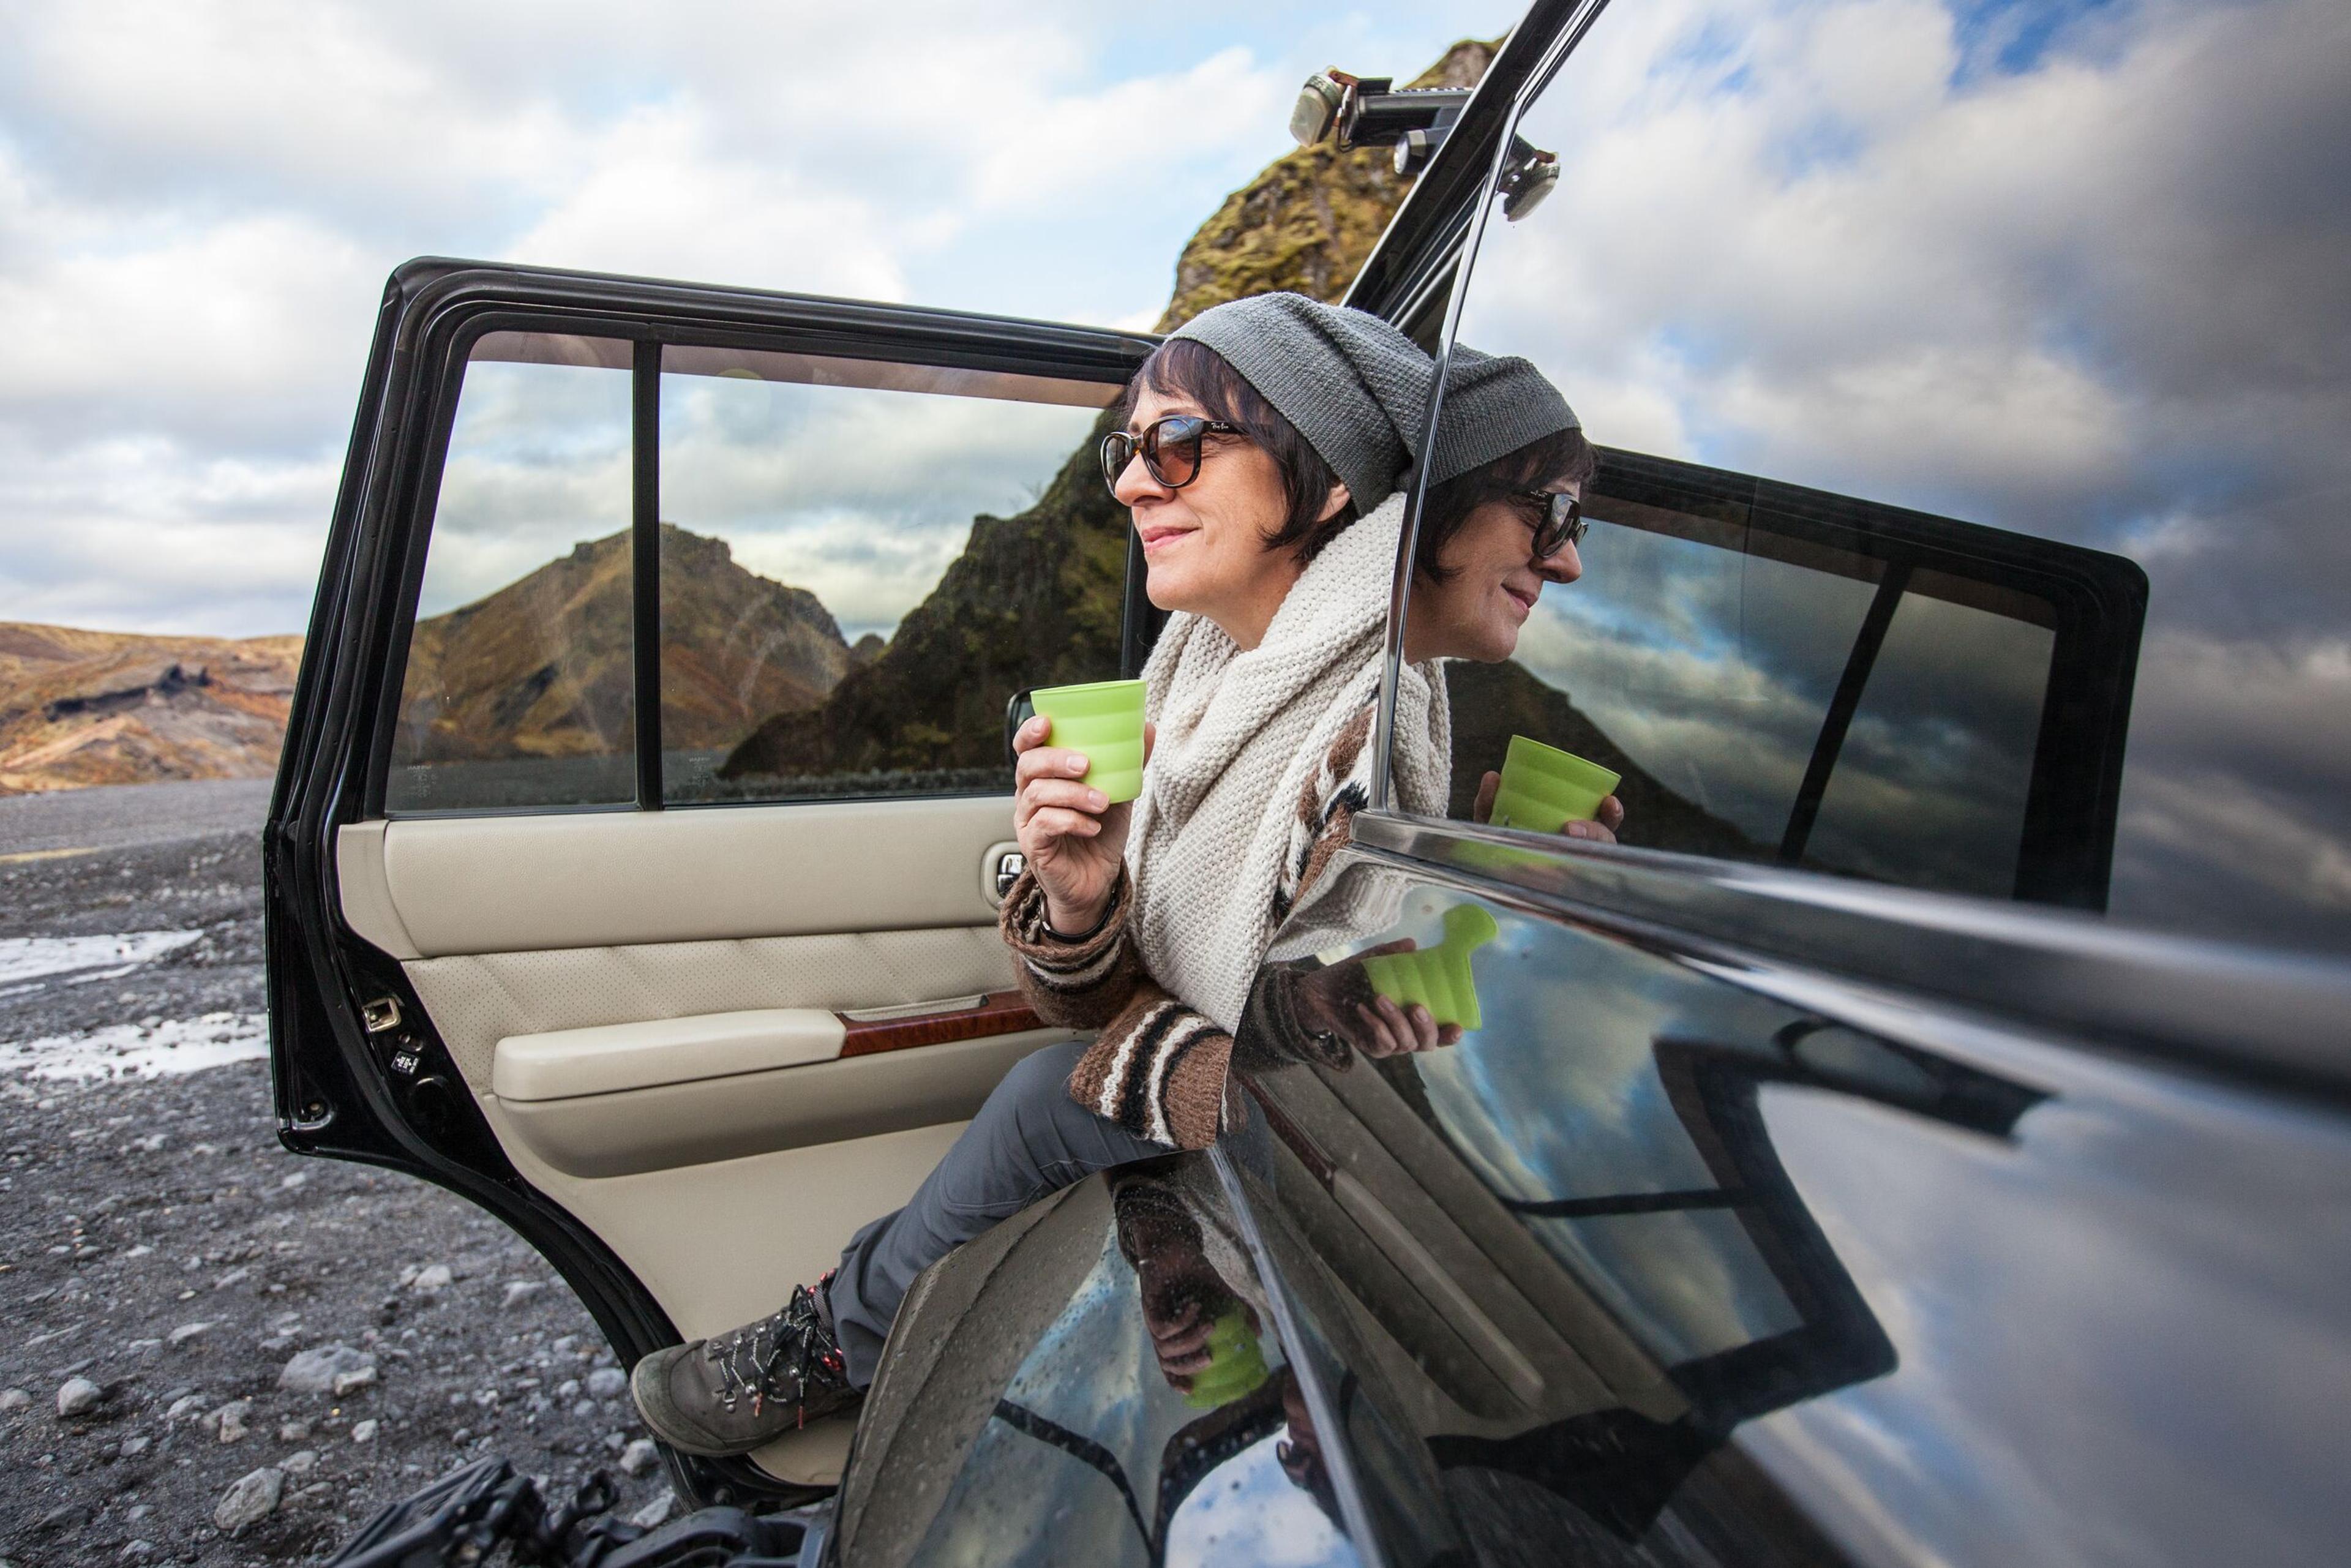 Traveler in sunglasses holding a cup, seated inside a car with the door open, gazing outwards.